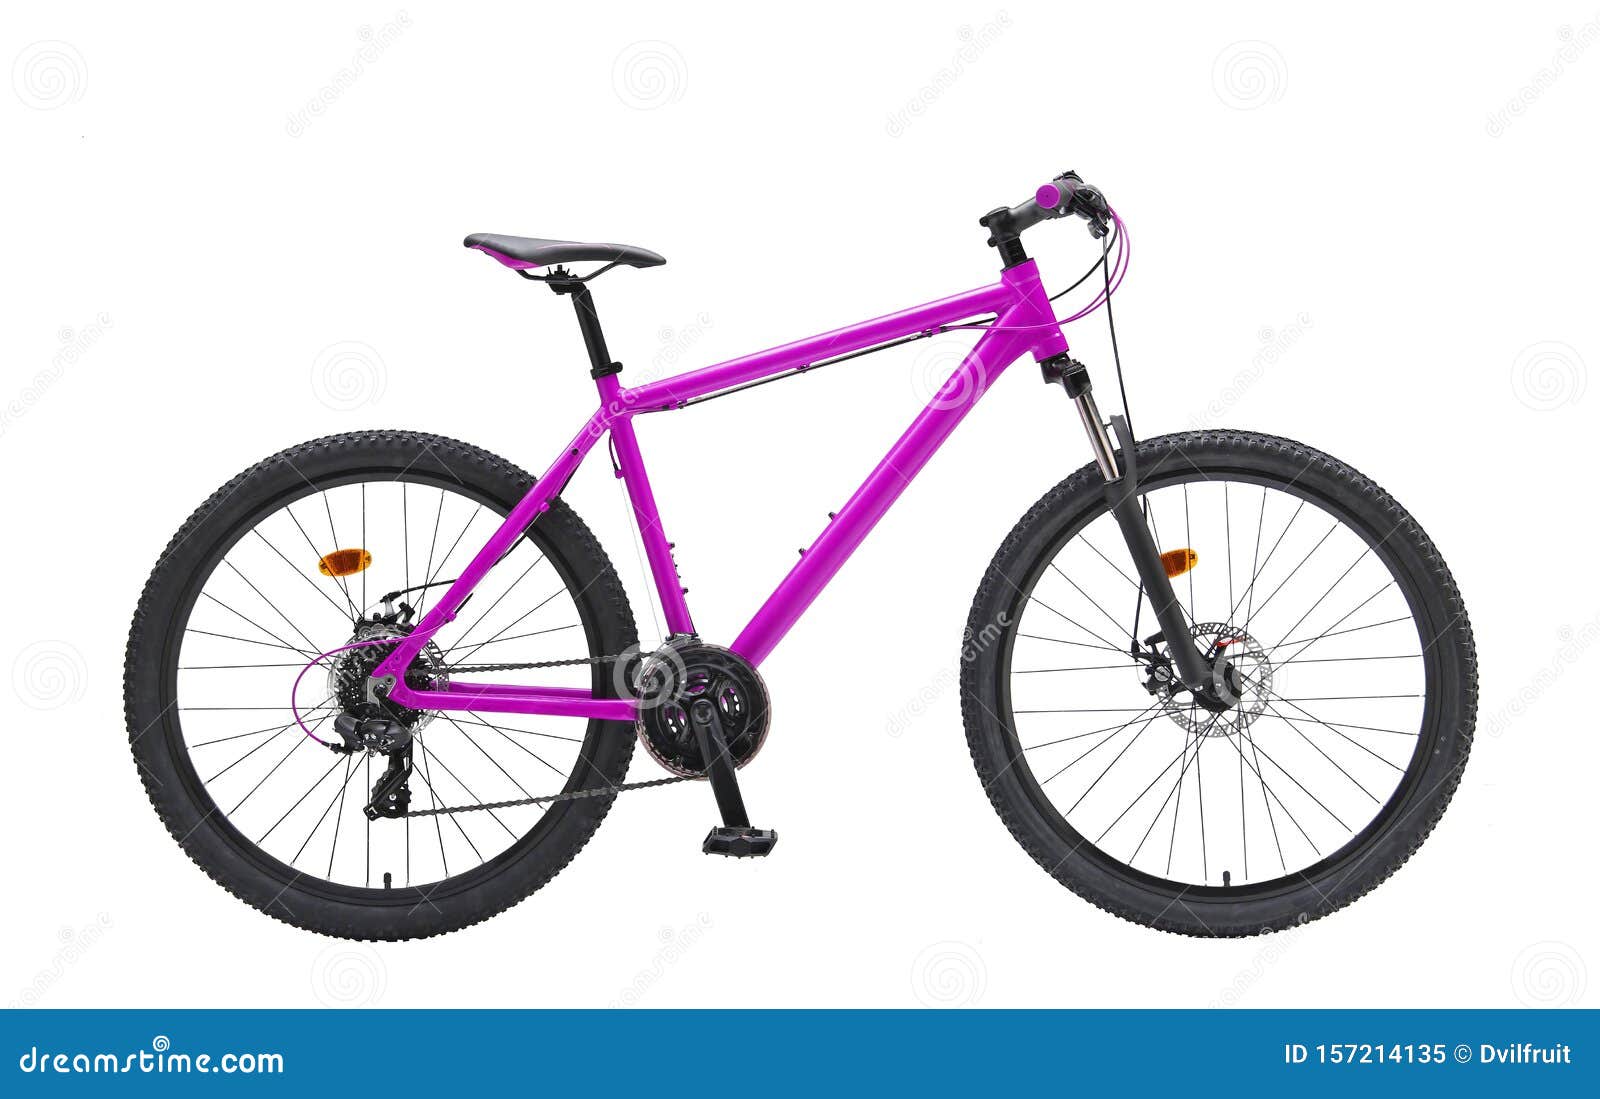 Isolated Mountain Bike 29r for Gent in Purple Color Stock Image - Image